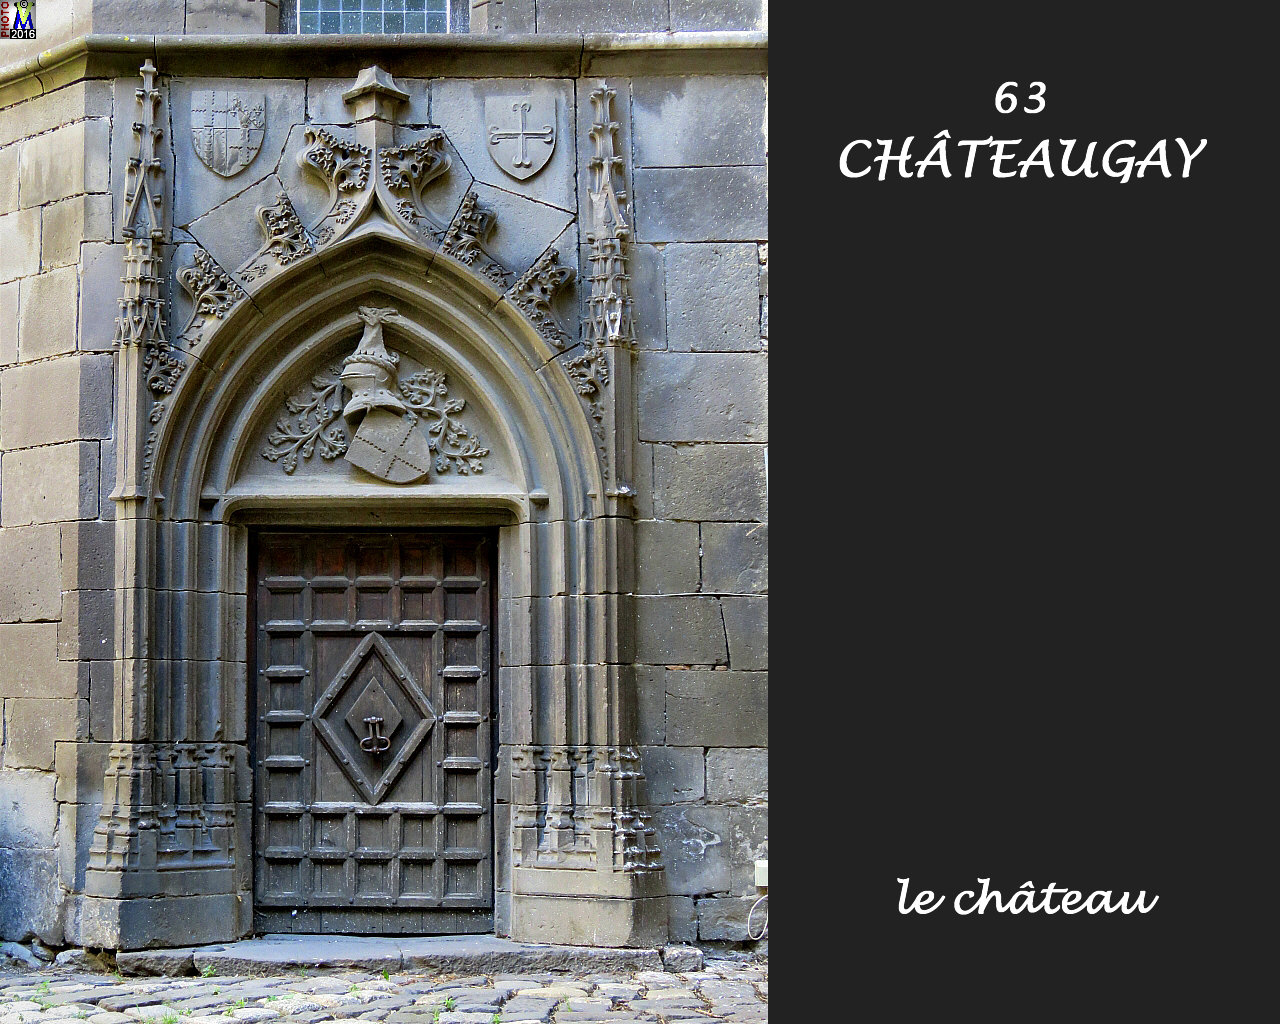 63CHATEAUGAY_chateau_118.jpg